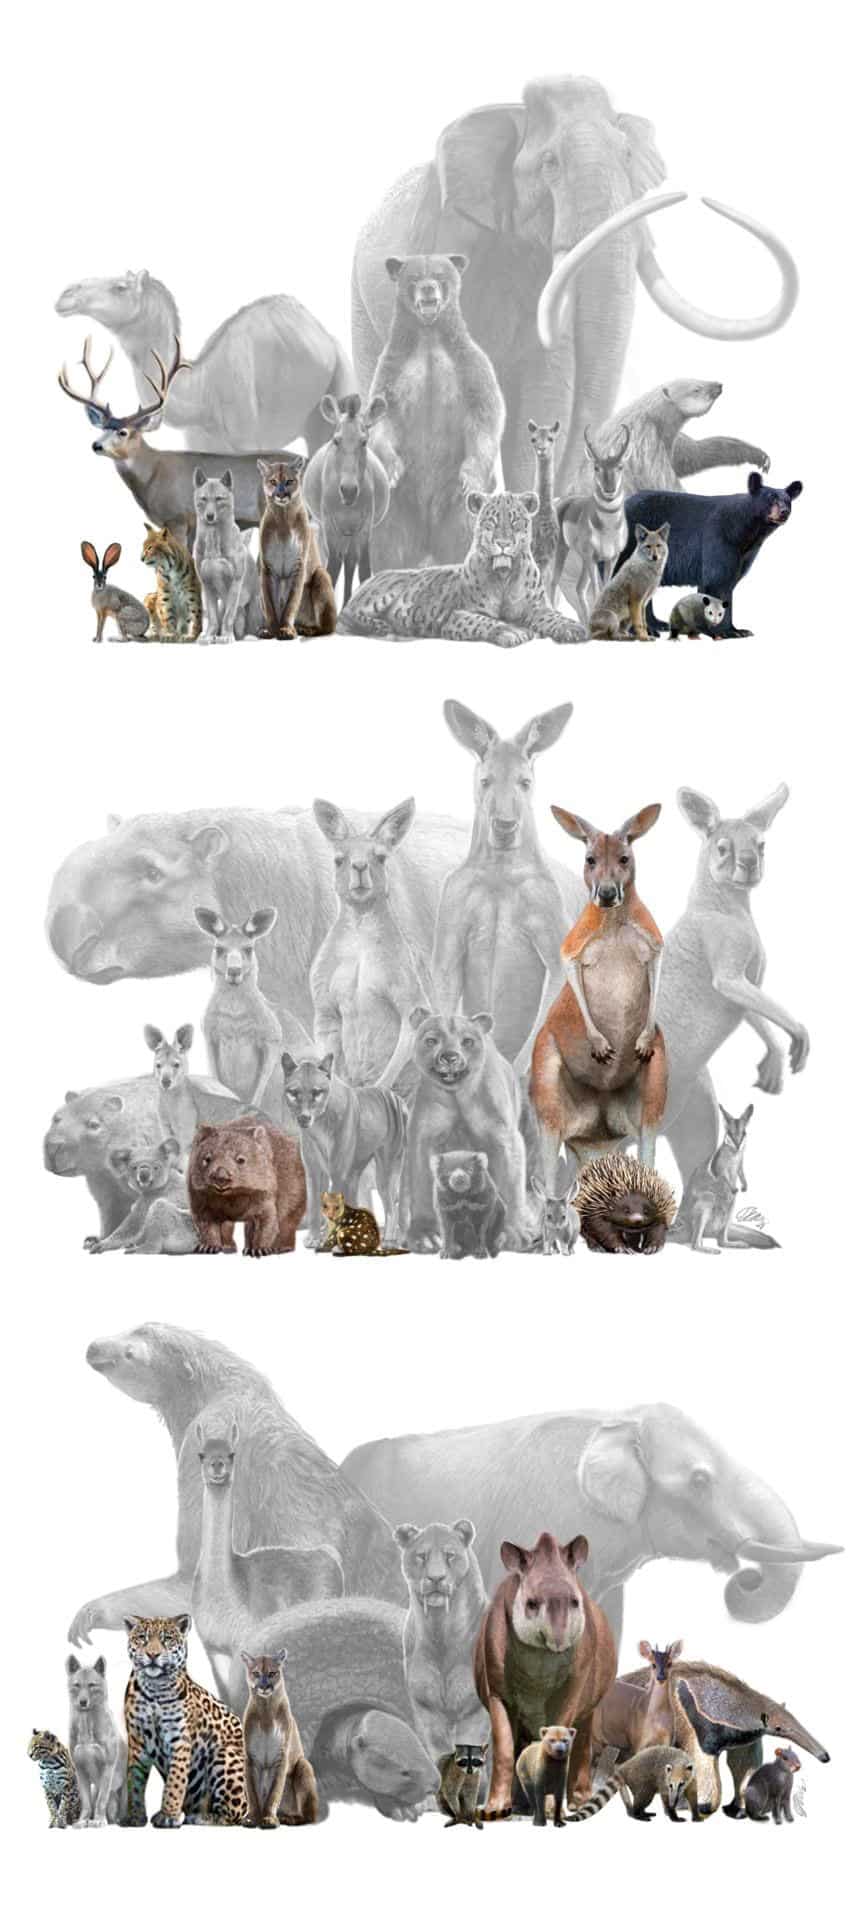 three sets of animals, each of which has missing creatures in gray behind those alive today